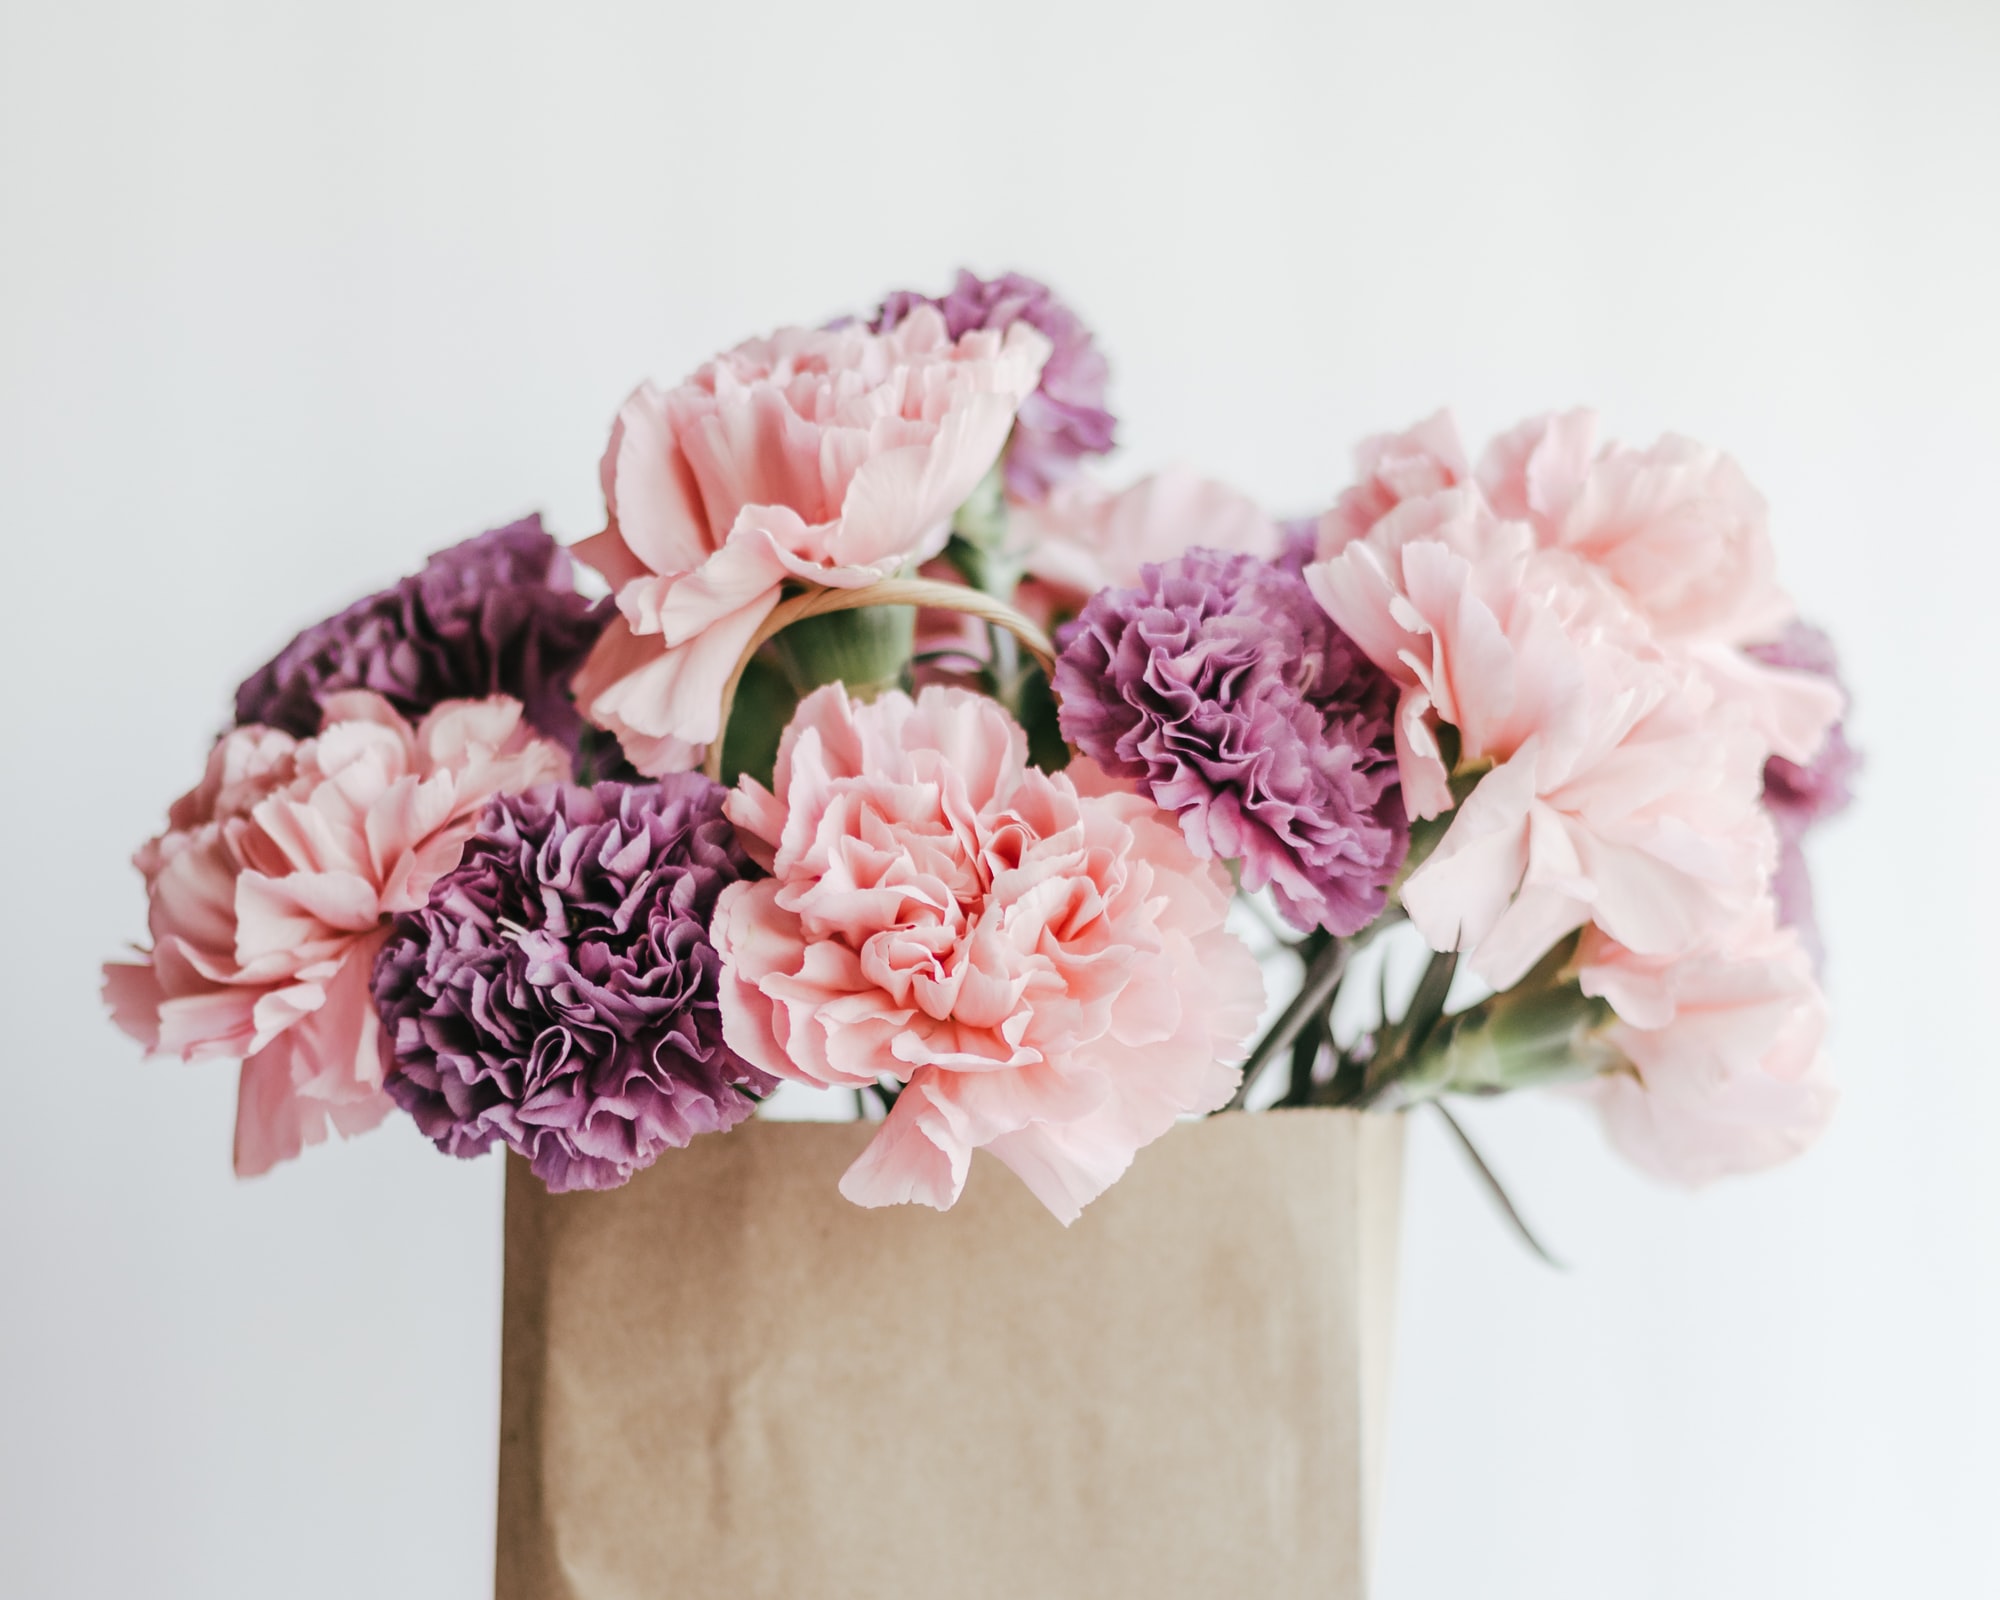 Buying flowers for women; a crash course